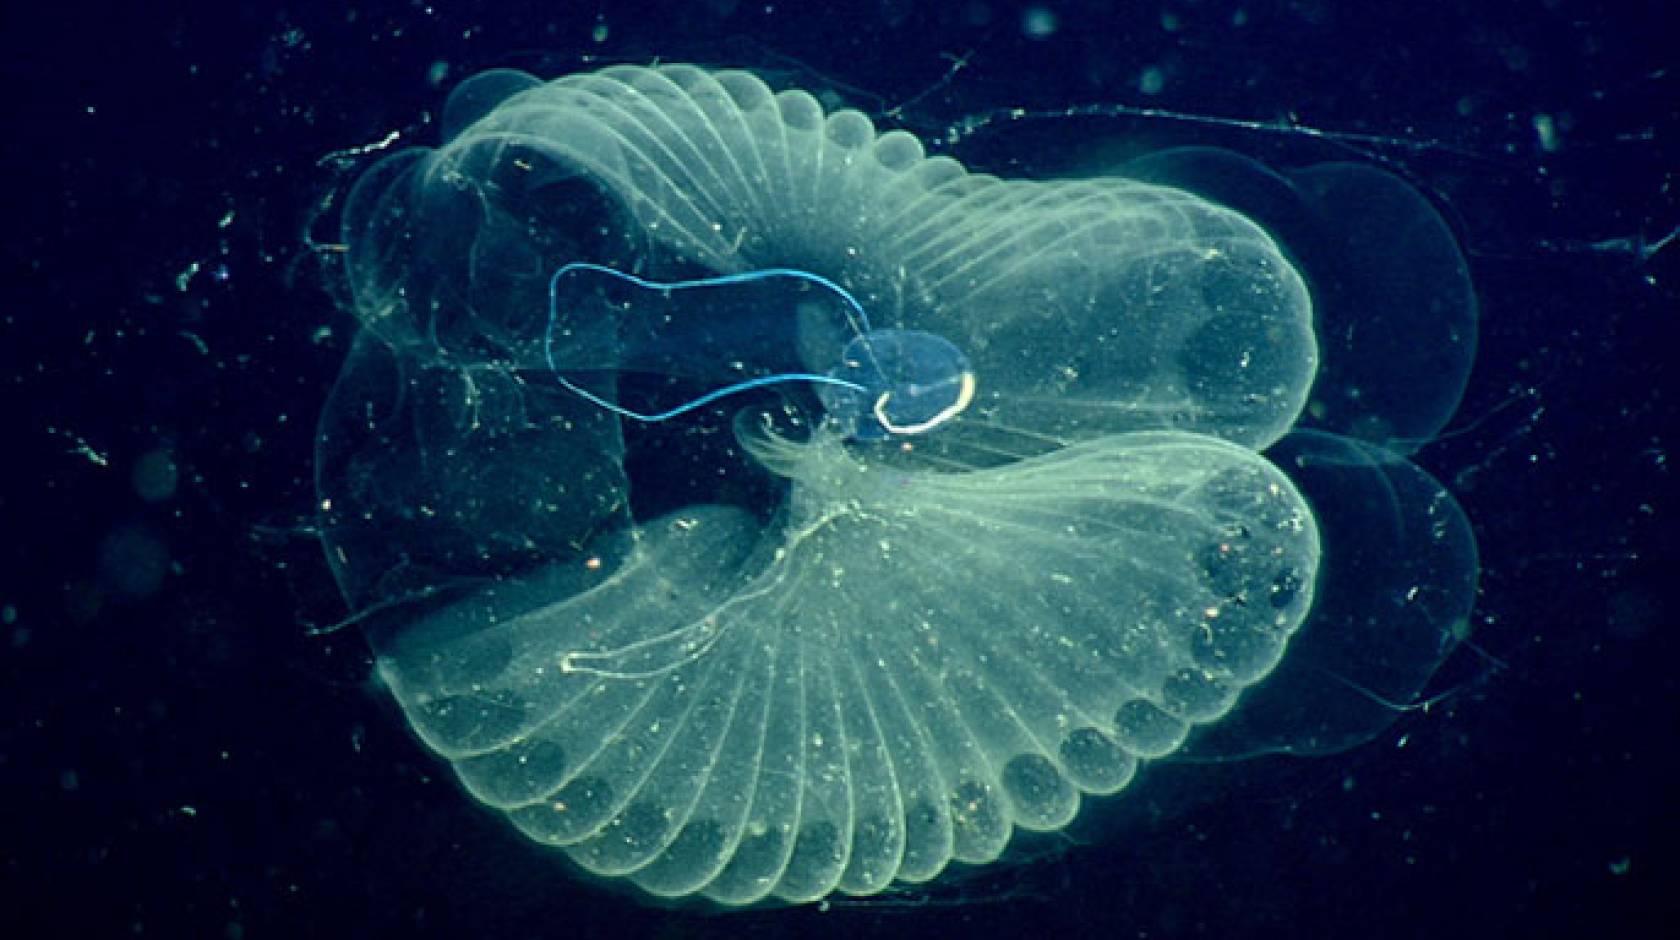 Larvacean with microplastic particles within